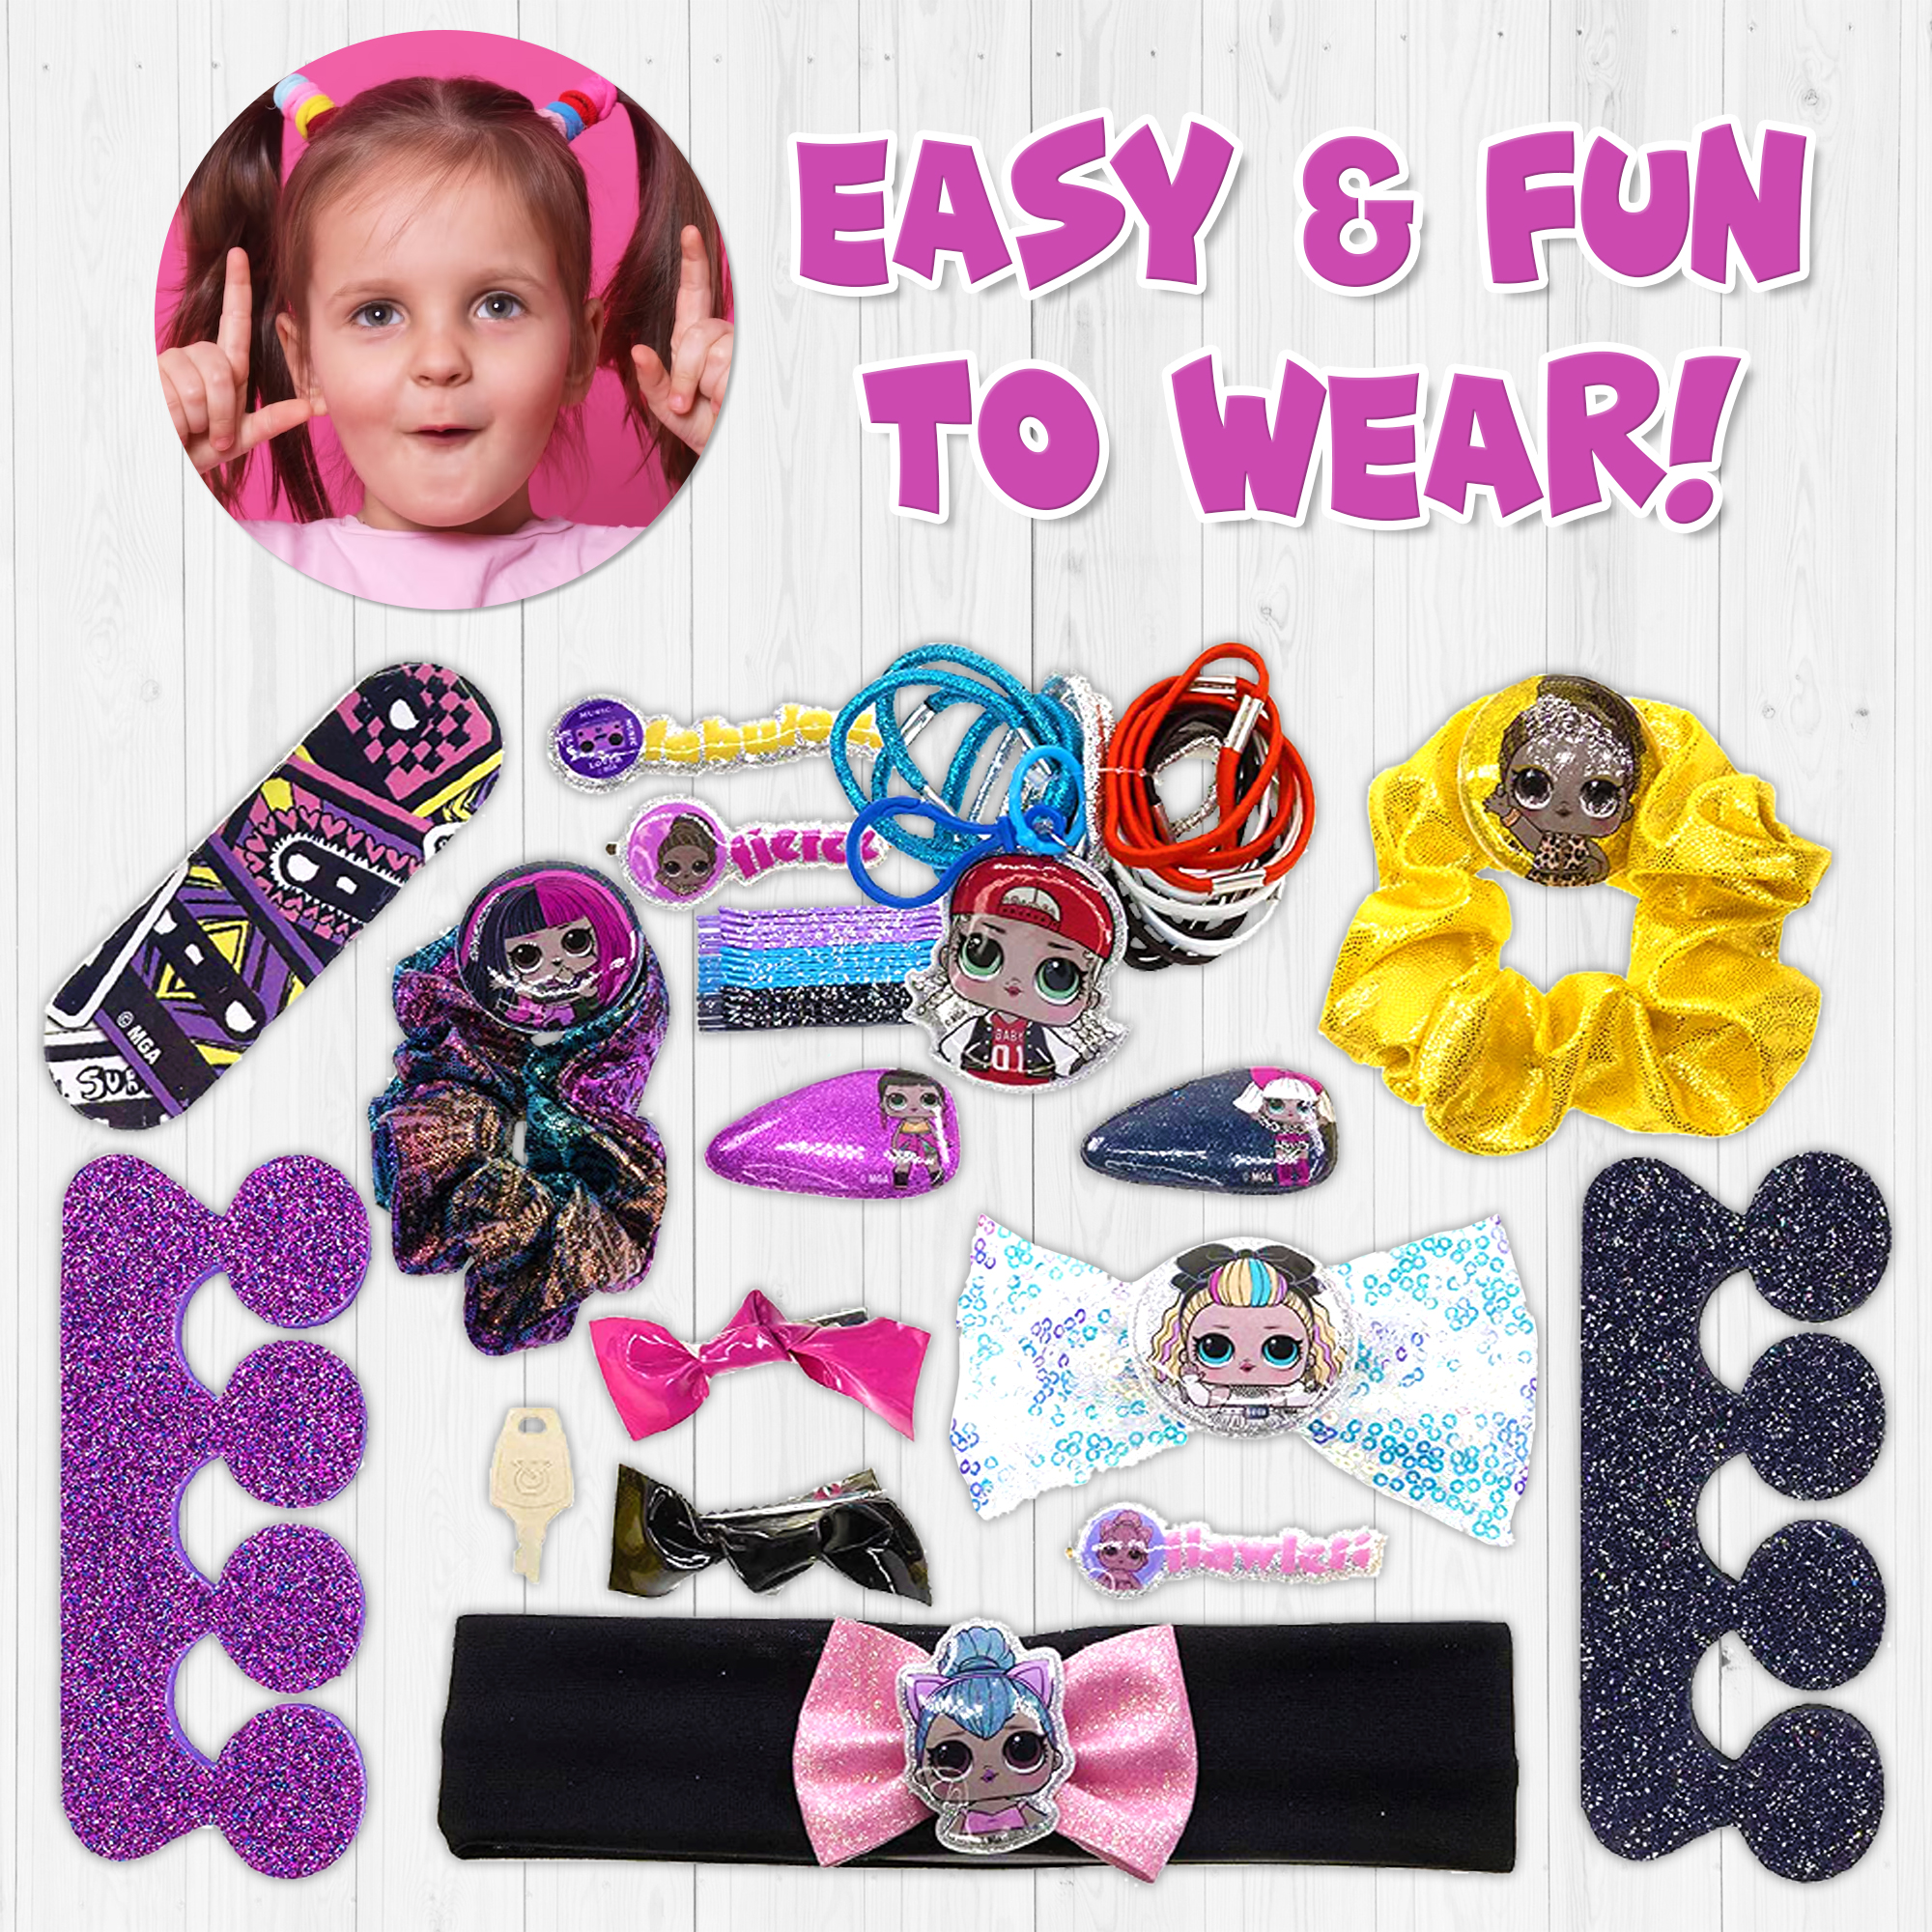 L.O.L. Surprise! Train Case Pretend Play Cosmetic Nail Lip and Hair Accessories Set for Girls, Ages 3+, By Townley Girl - image 4 of 12